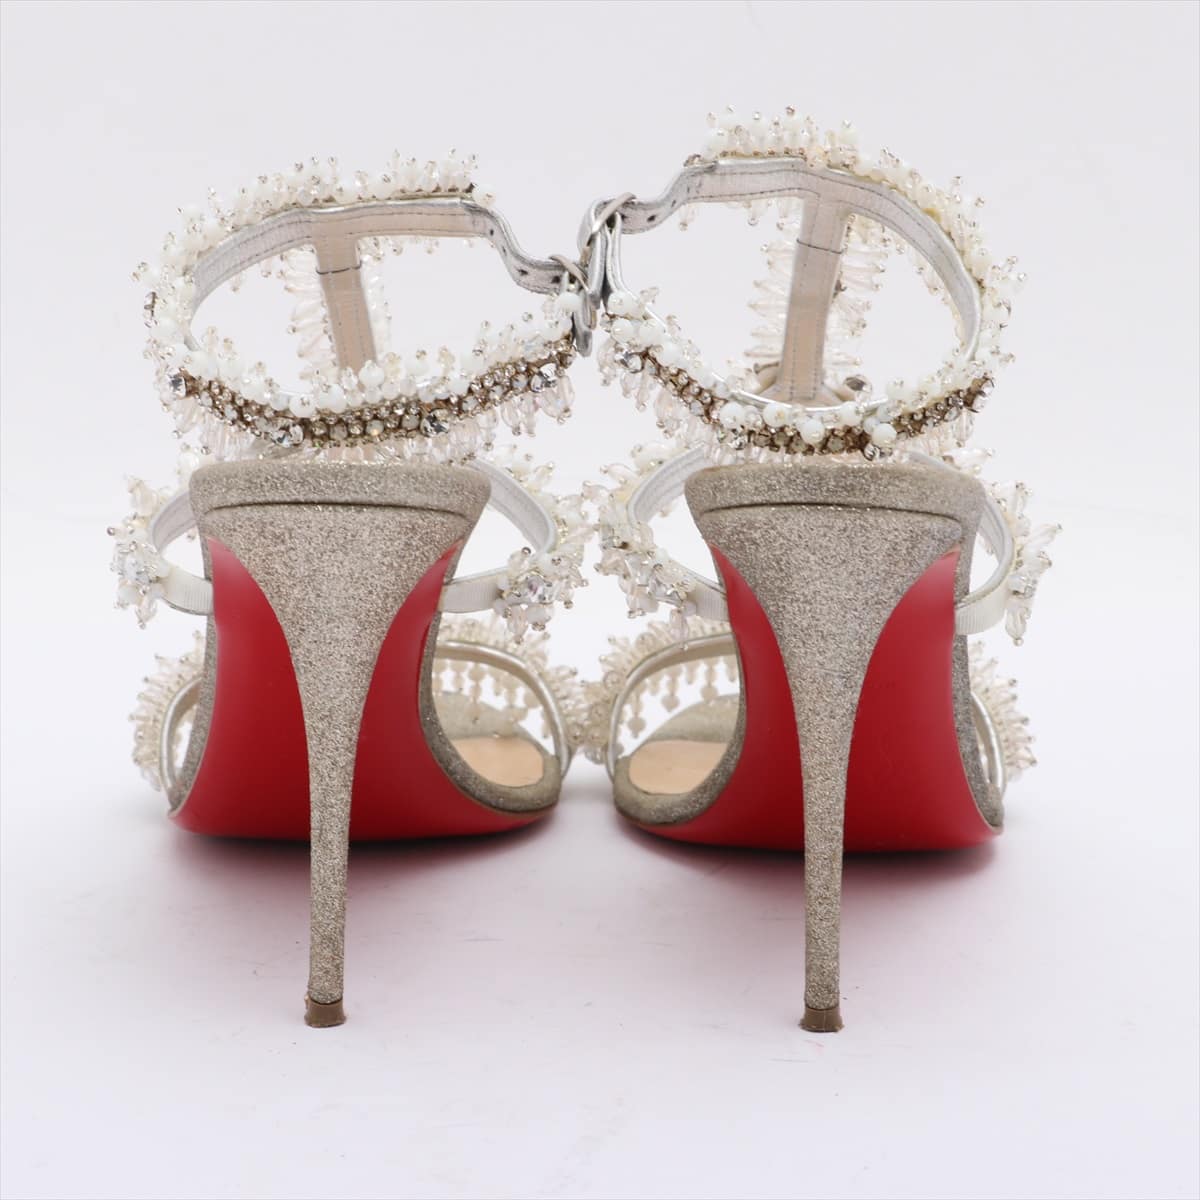 Christian Louboutin Glitter Sandals 37.5 Ladies' Silver Bijou There is discoloration on the upper